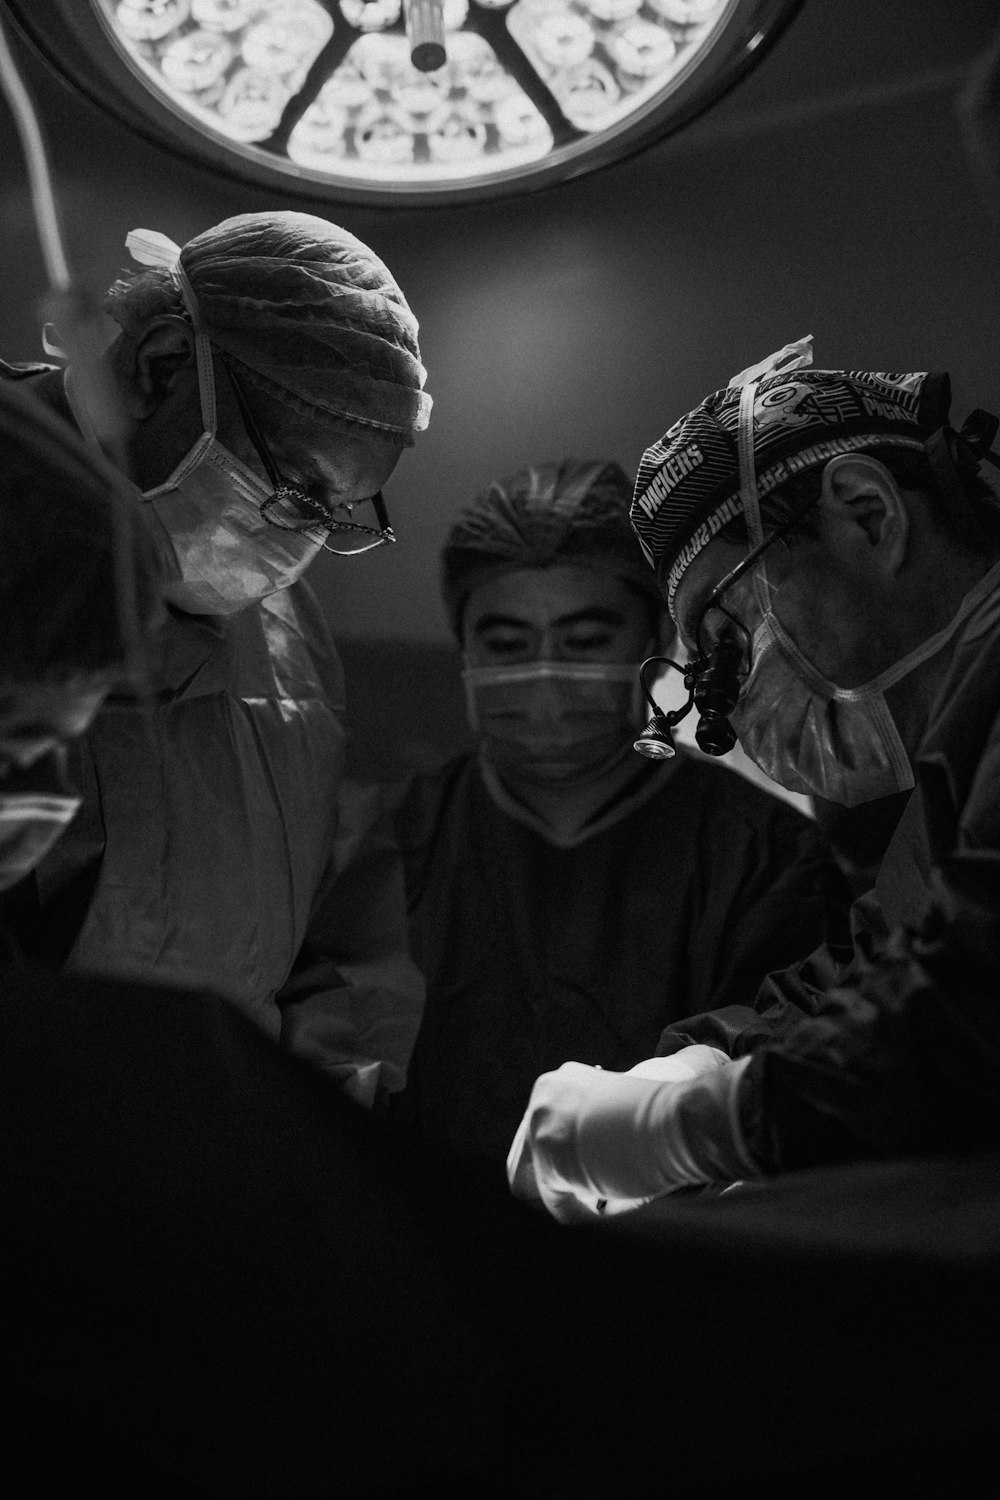 gray scale photo of three nurses and doctor about to perform surgery